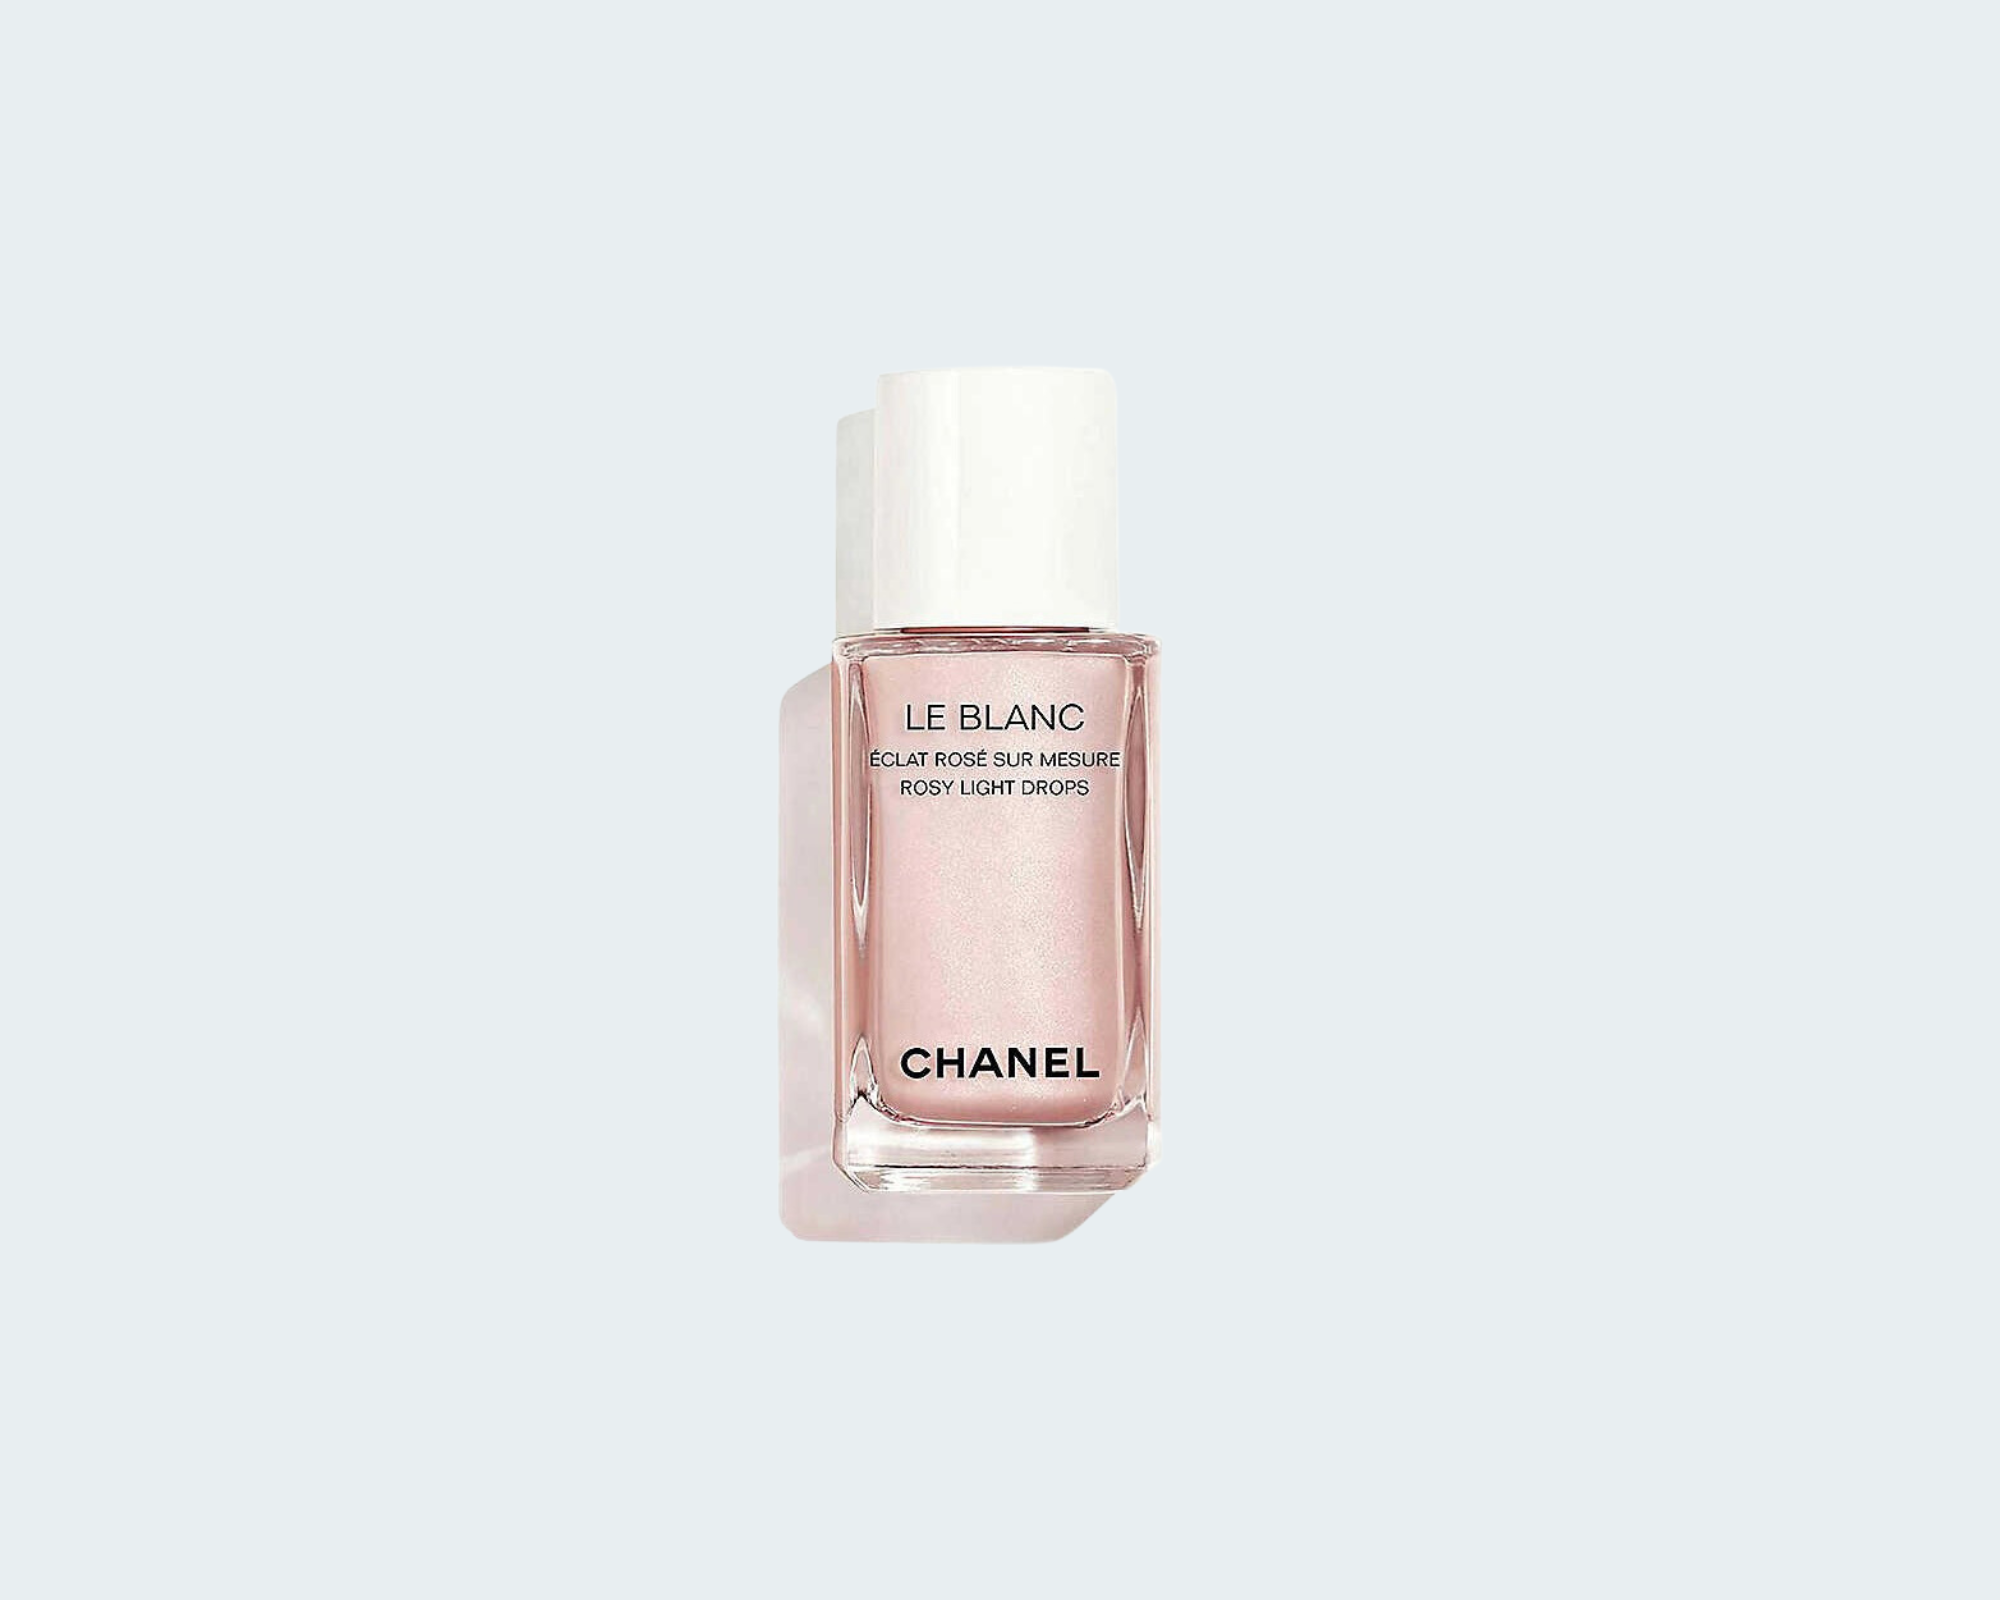 CHANEL Le Blanc Oil-In-Cream Compact Foundation Whitening – Thermal Comfort  SPF 40 / PA ++ Reviews 2023